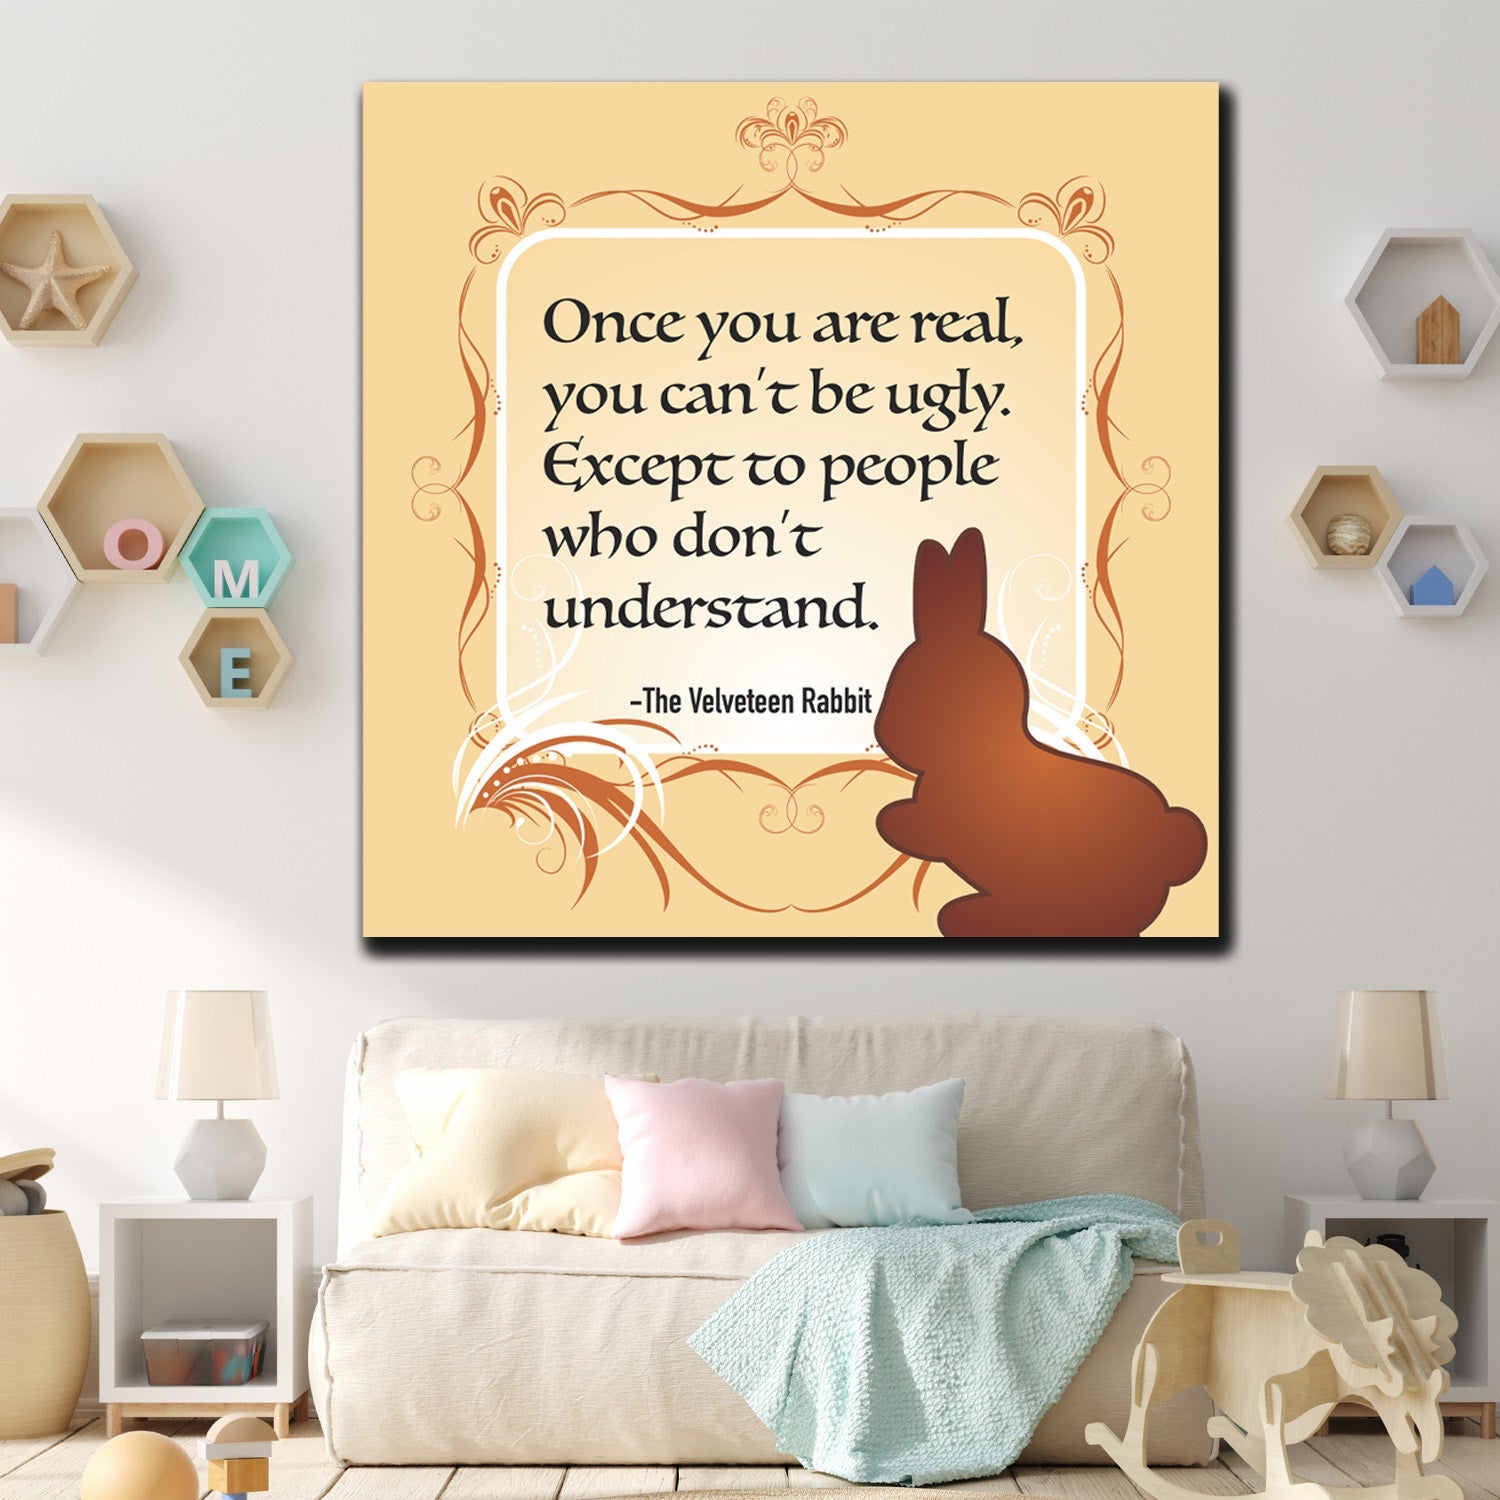 https://cdn.shopify.com/s/files/1/0387/9986/8044/products/TheVelveteenRabbitQuoteCanvasArtprintStretched-2.jpg